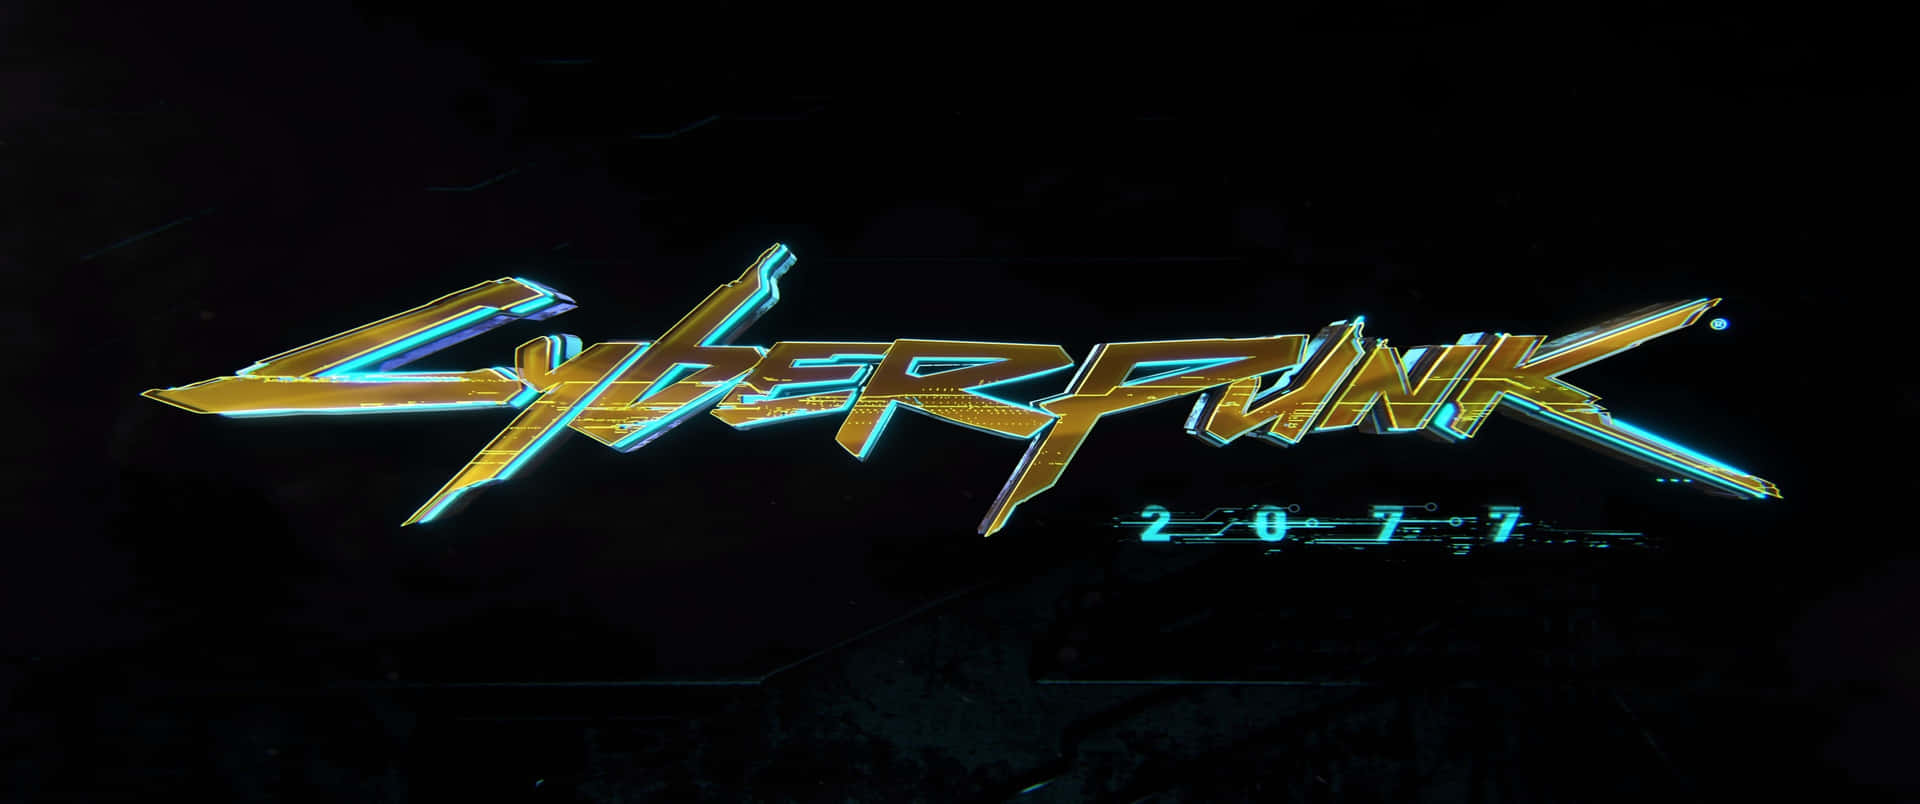 3440x1440p Cyberpunk 2077 Background Gold And Light Blue Game Title